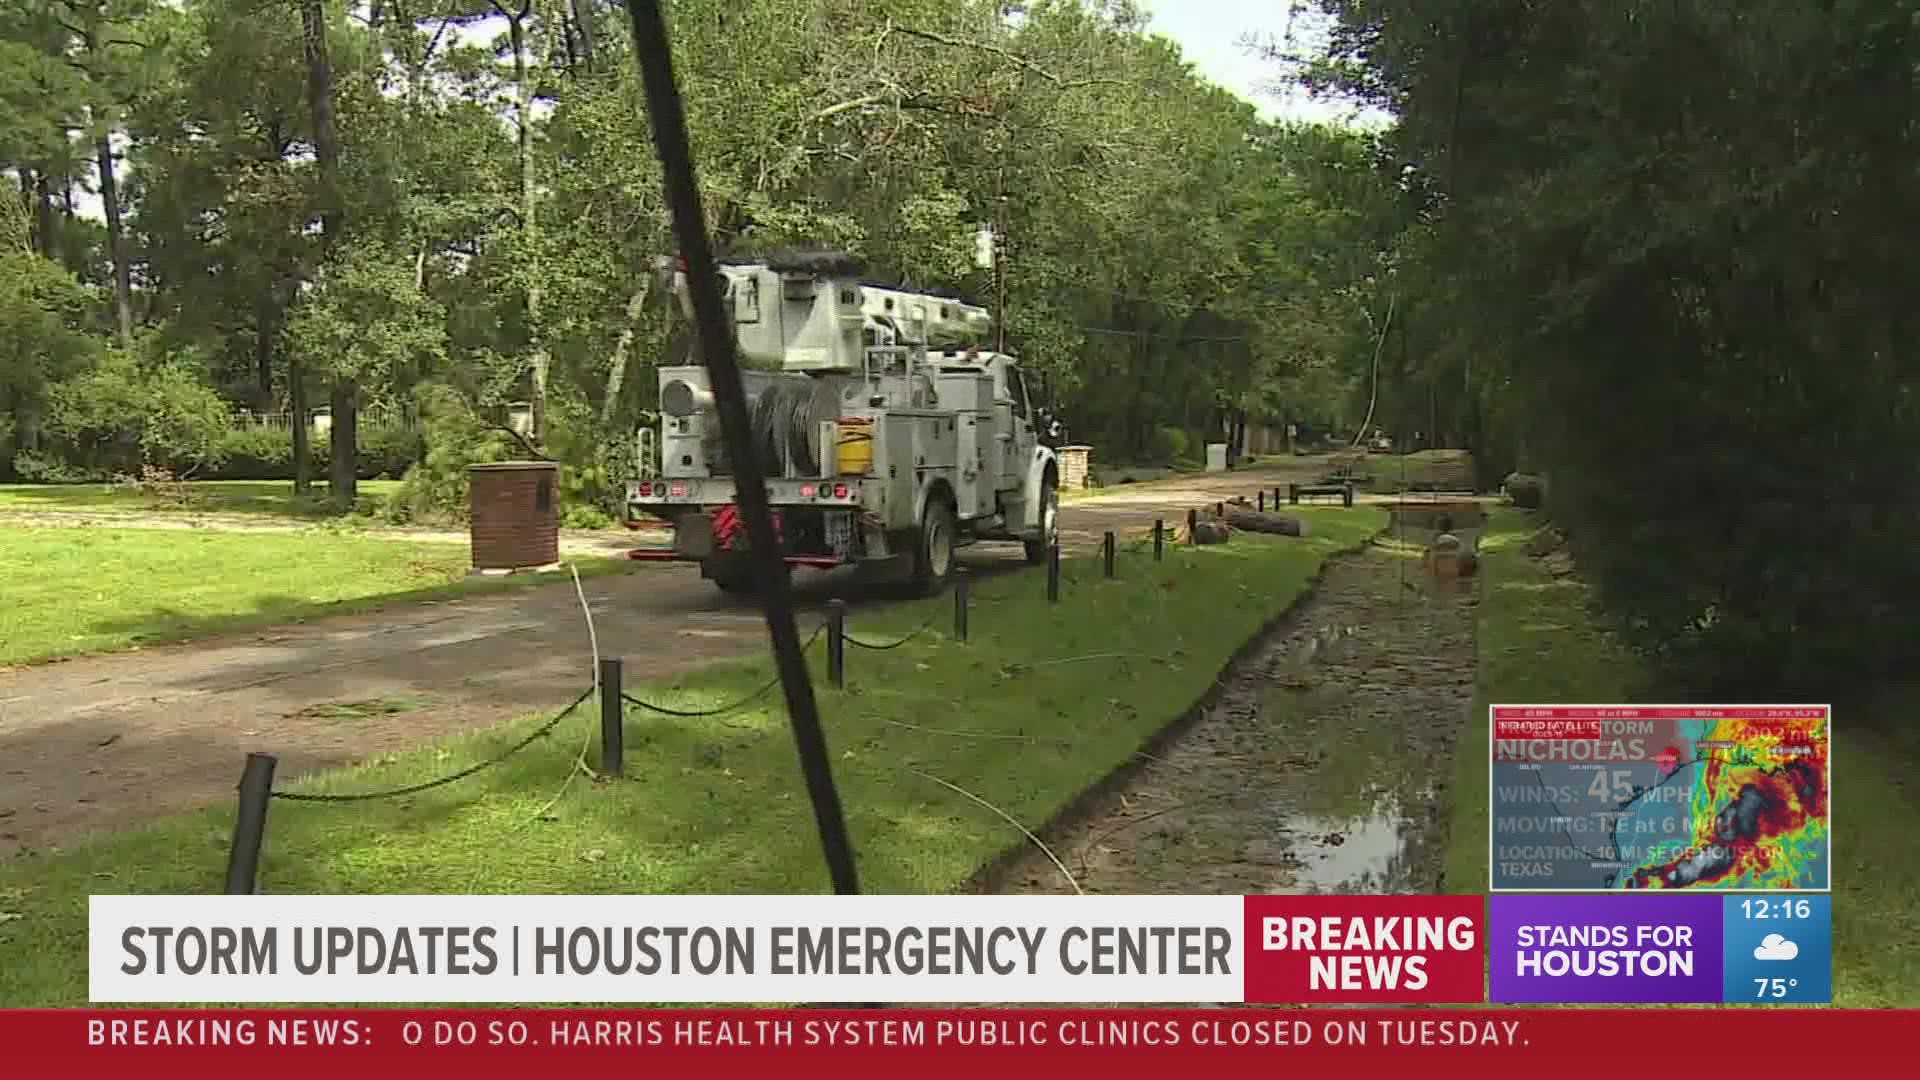 Nicholas caused citywide power outages and left roadways covered in debris in Houston, but Mayor Sylvester Turner says it could've been much worse.